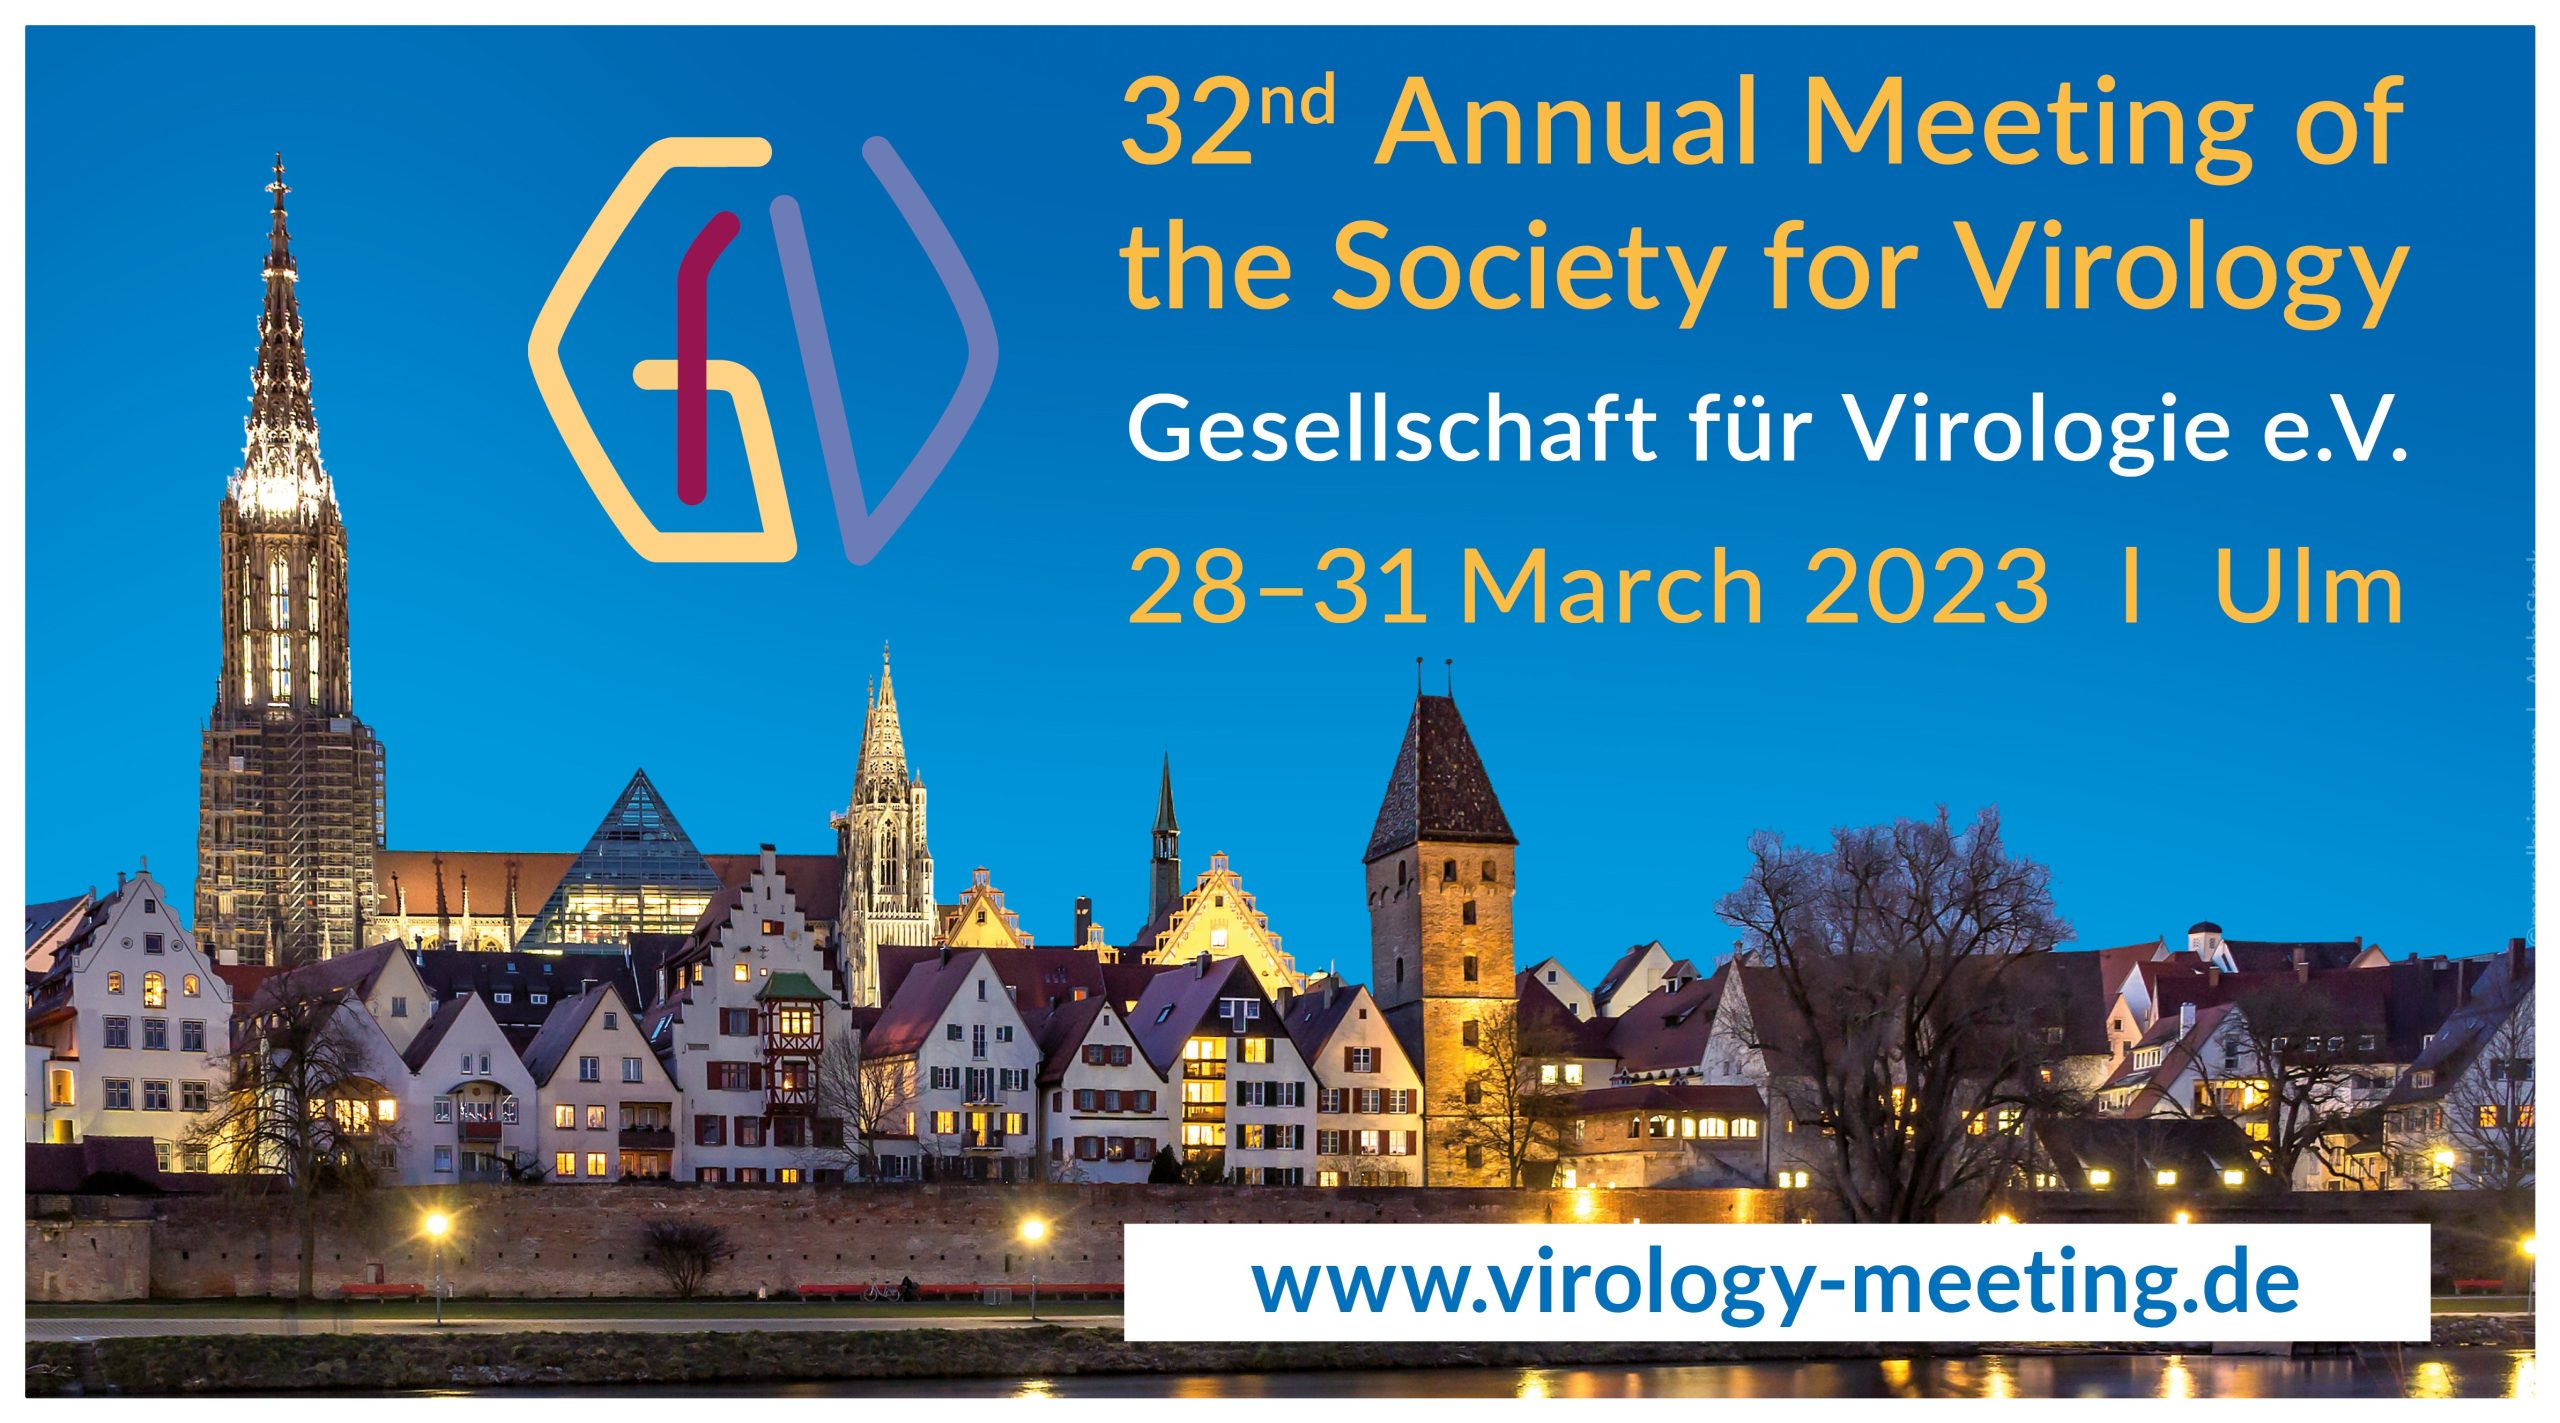 32nd Annual Meeting of the Society for Virology